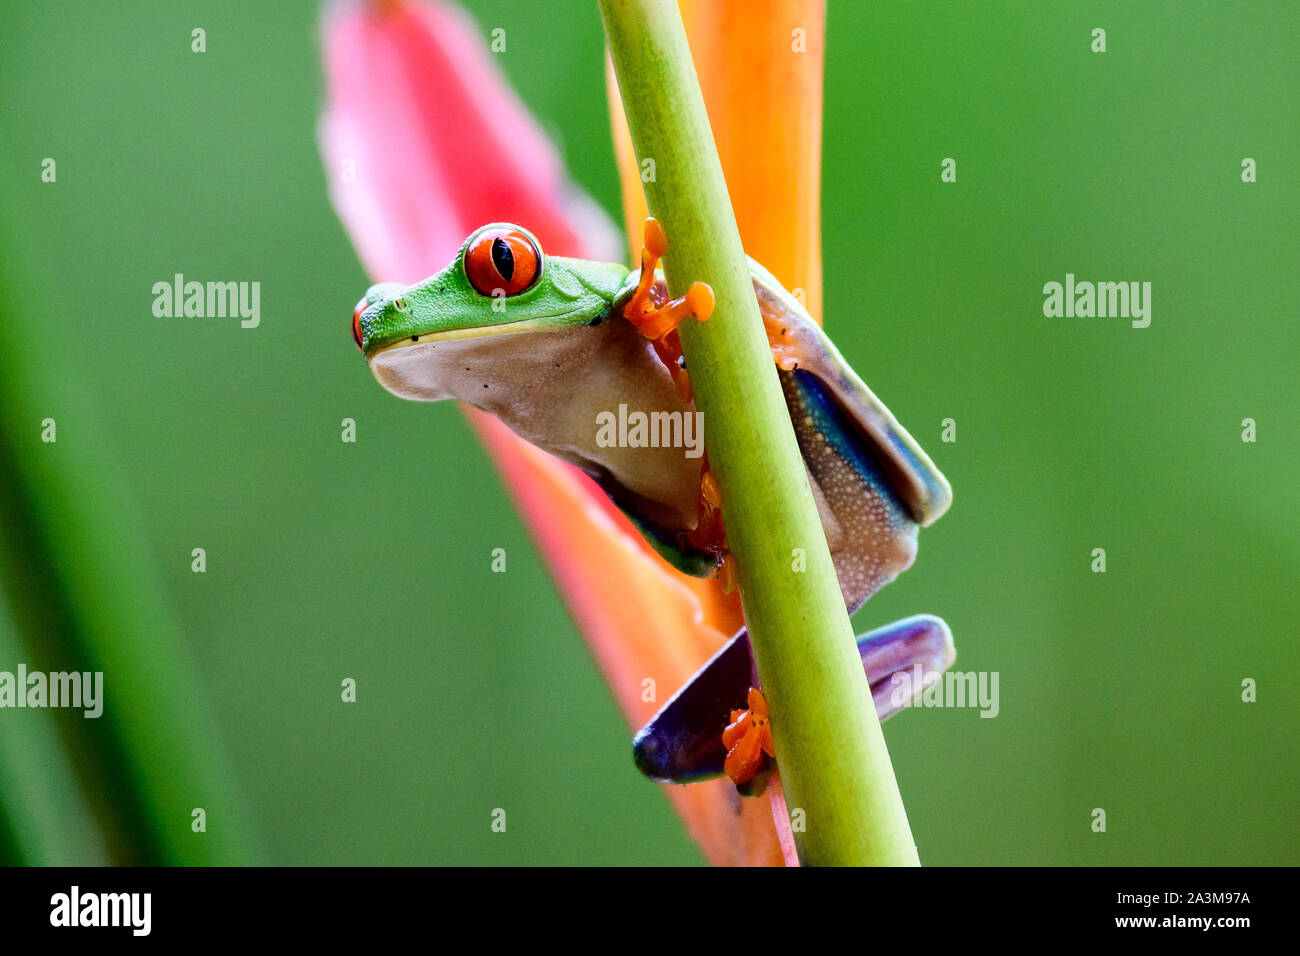 red eyed tree frog on a plant Stock Photo